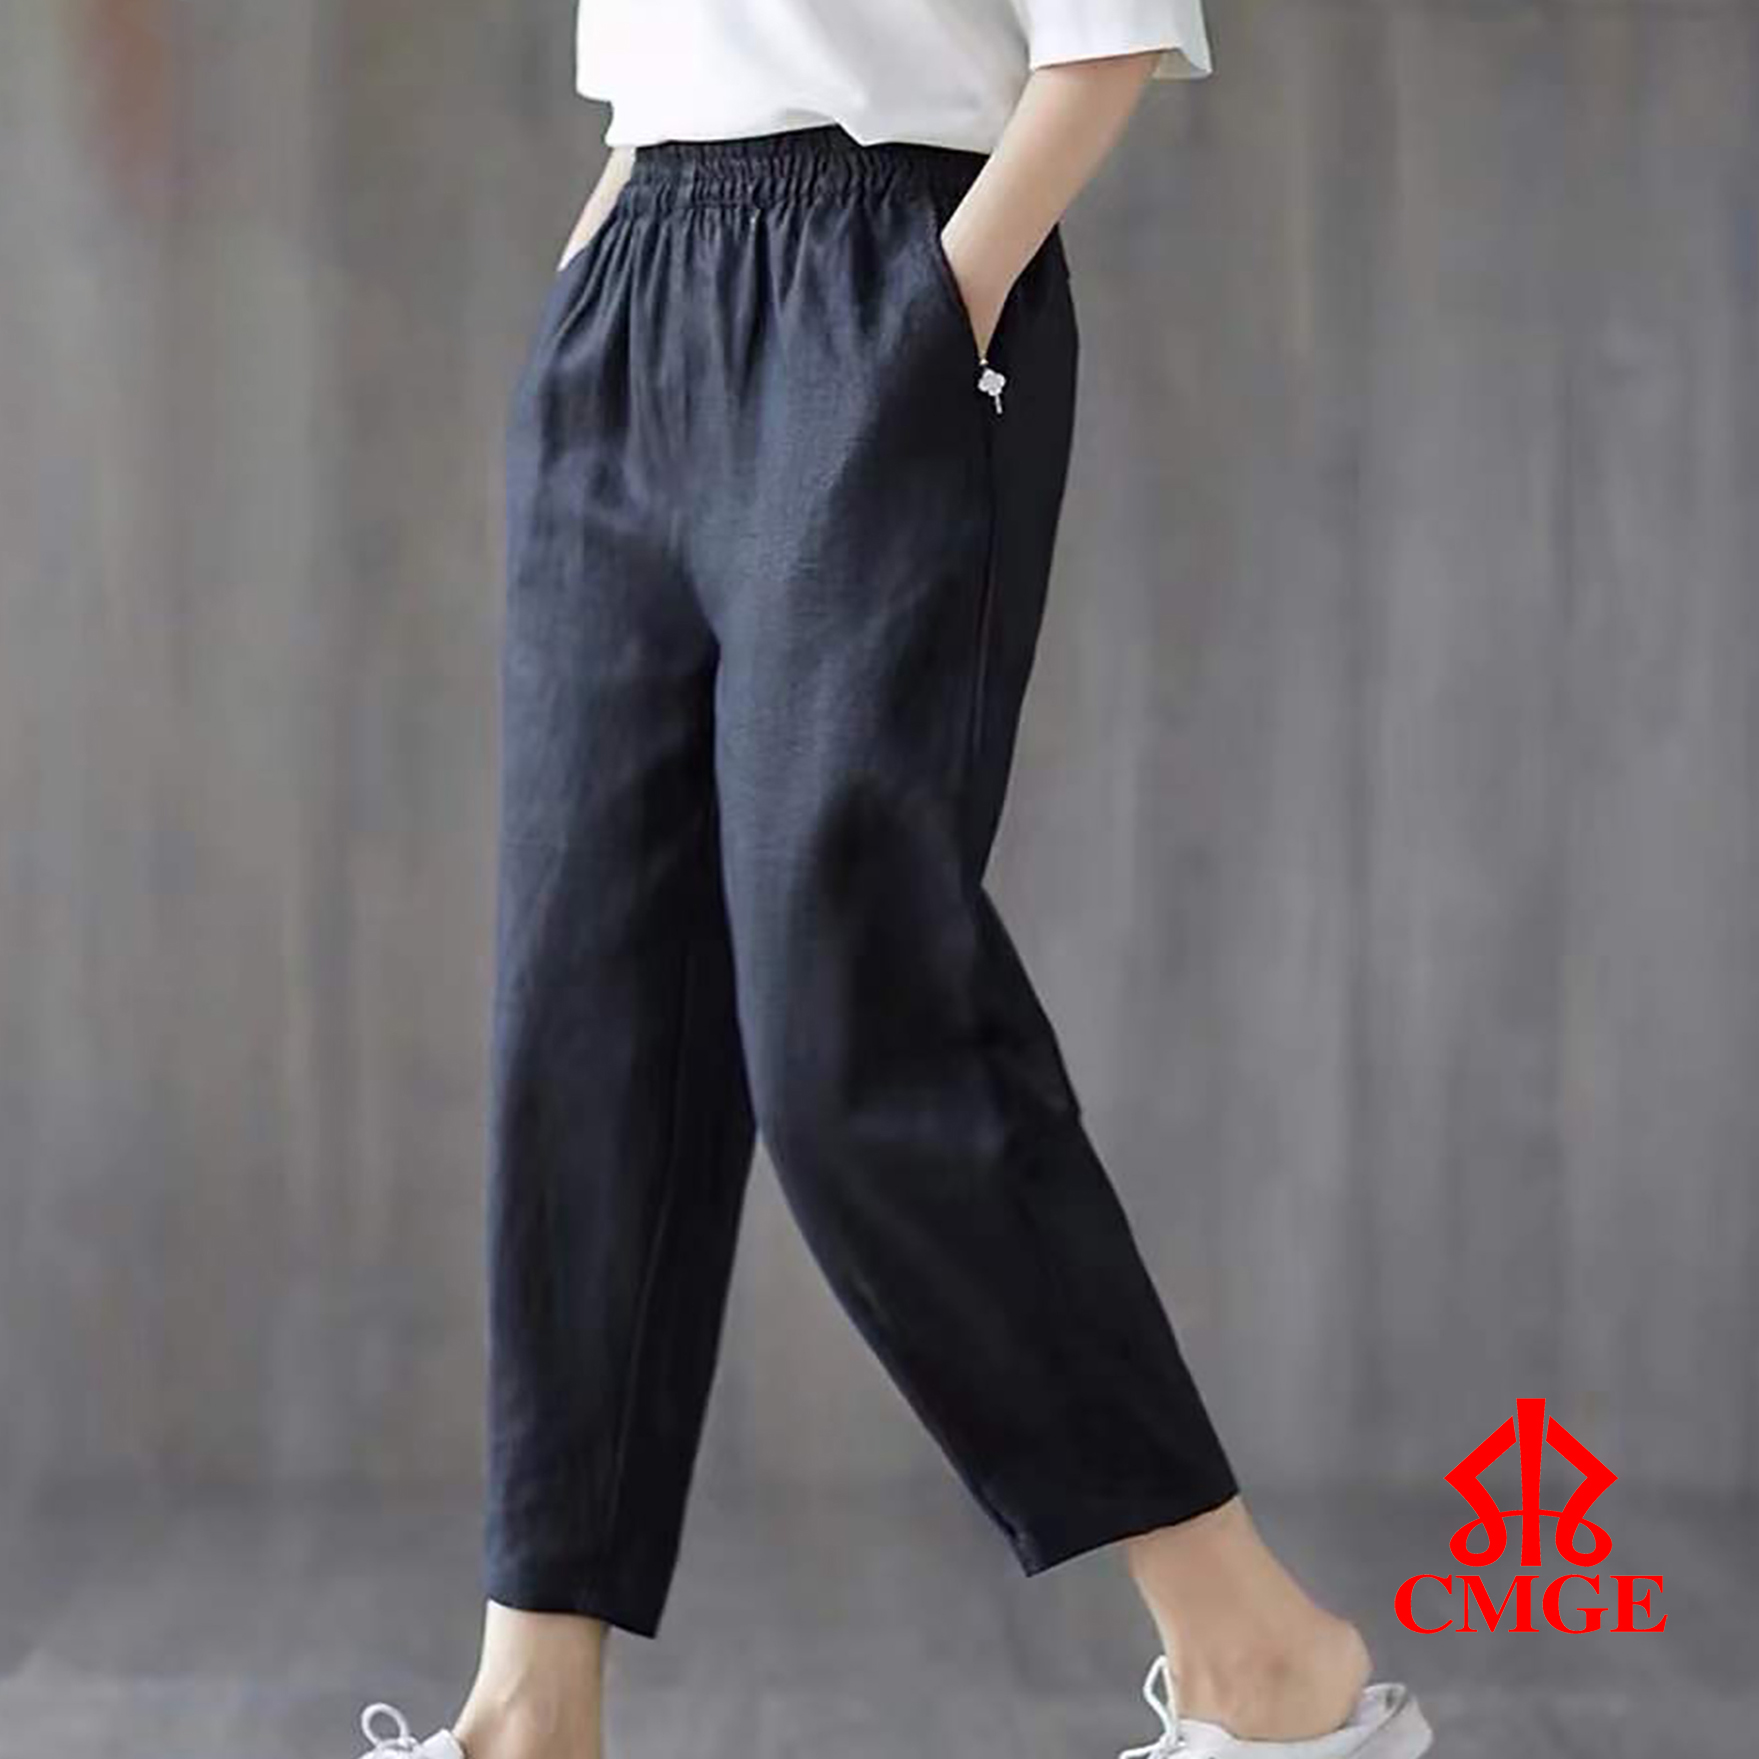 CMGE Cotton And Linen Casual Pants Women's Trousers Korean Version Of Loose  Pants #9902